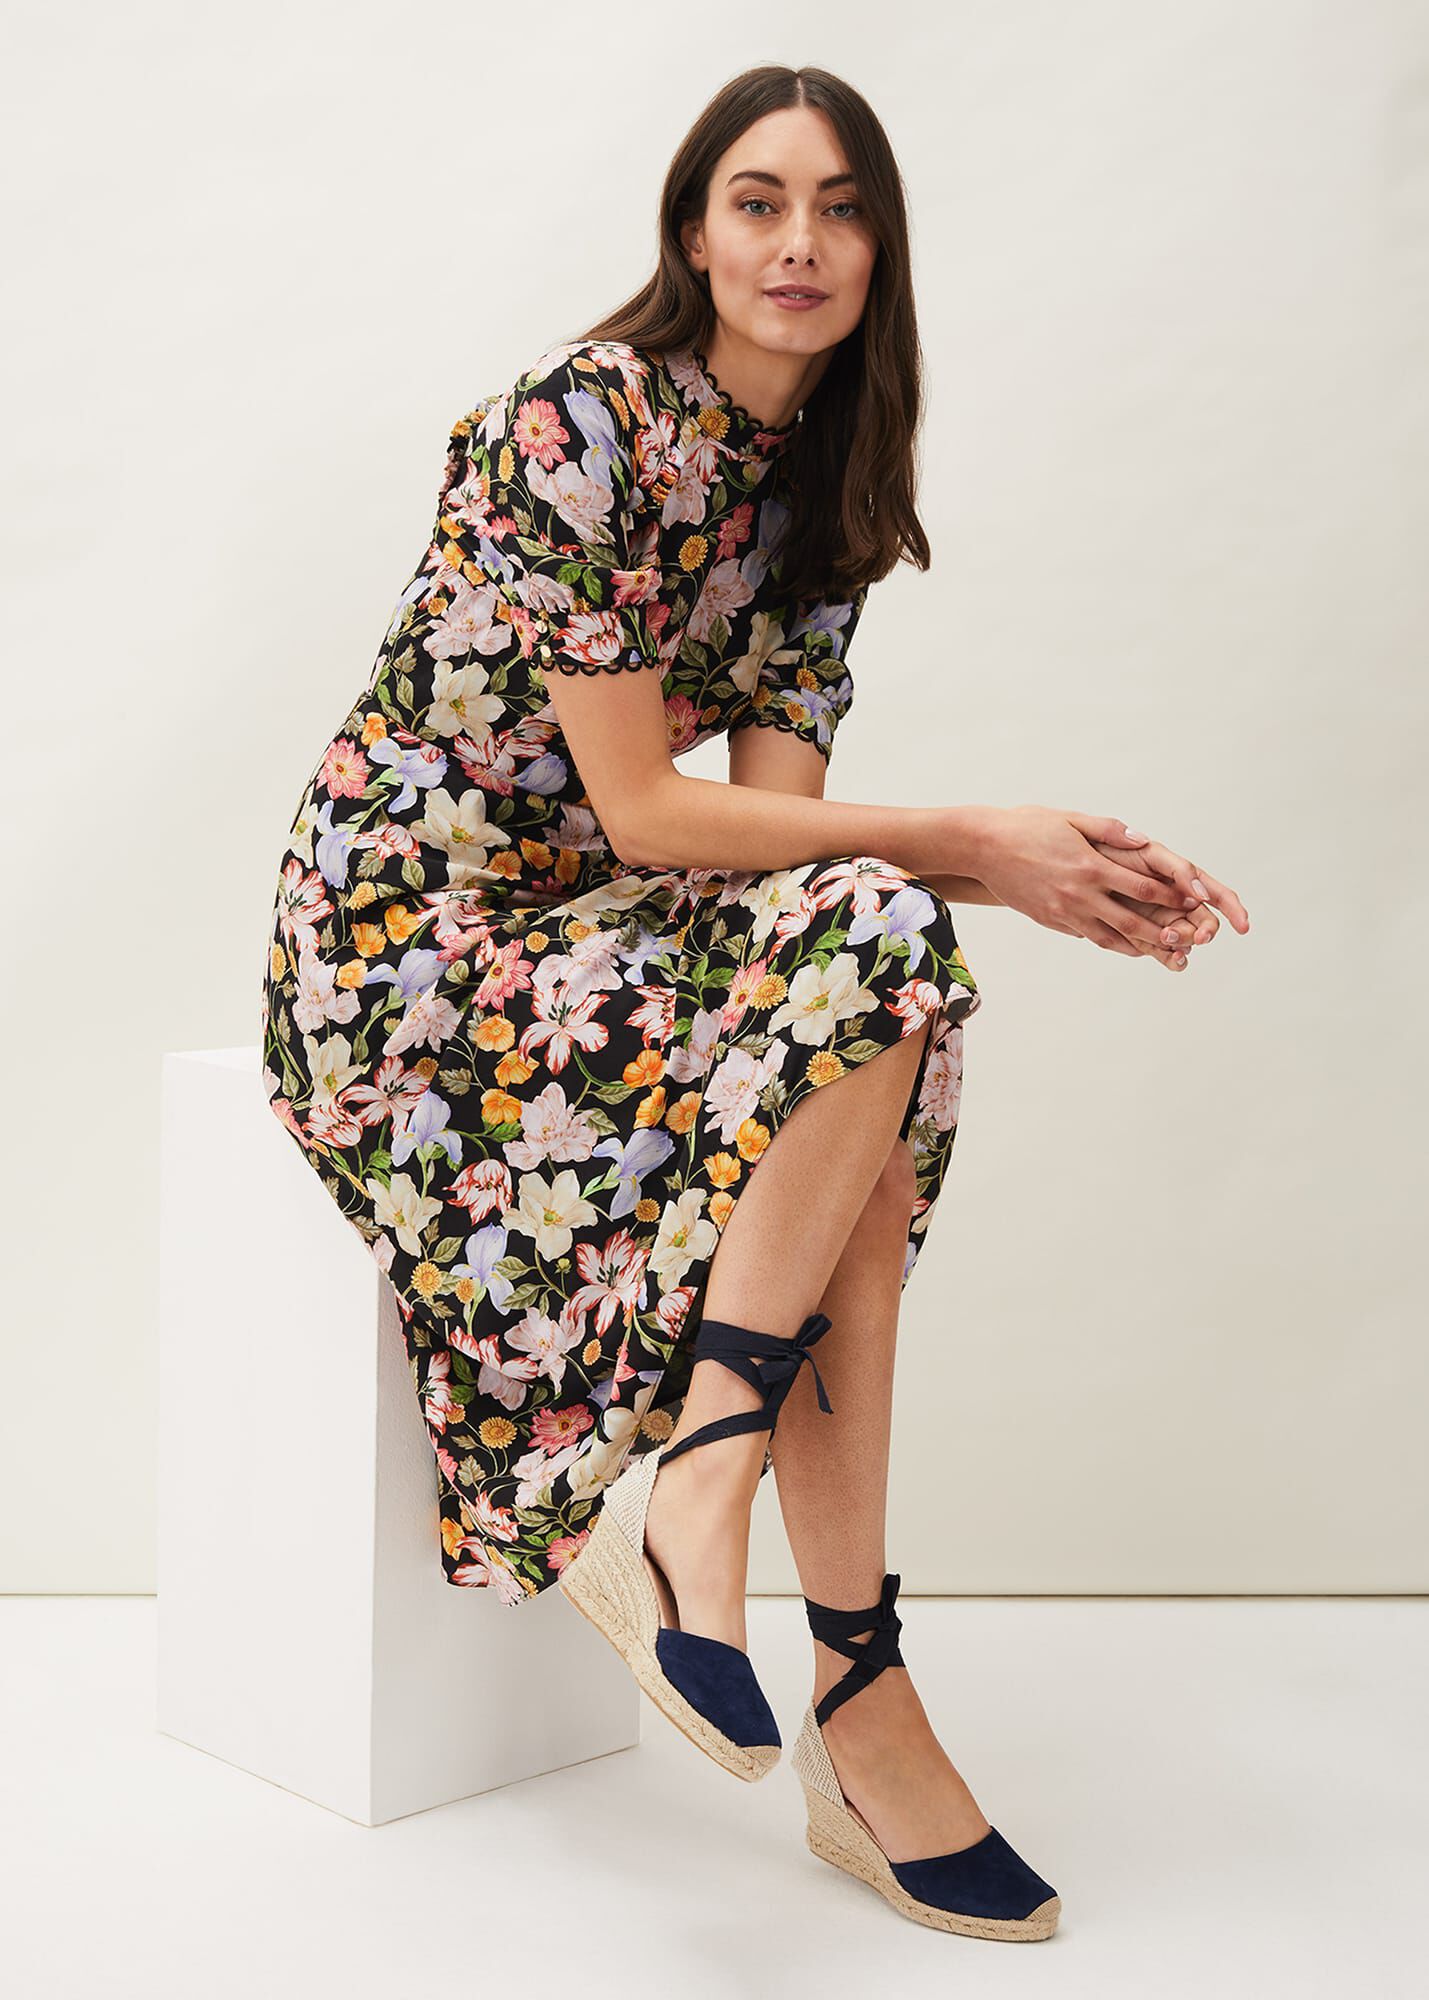 penelope-floral-puff-sleeve-dress-phase-eight